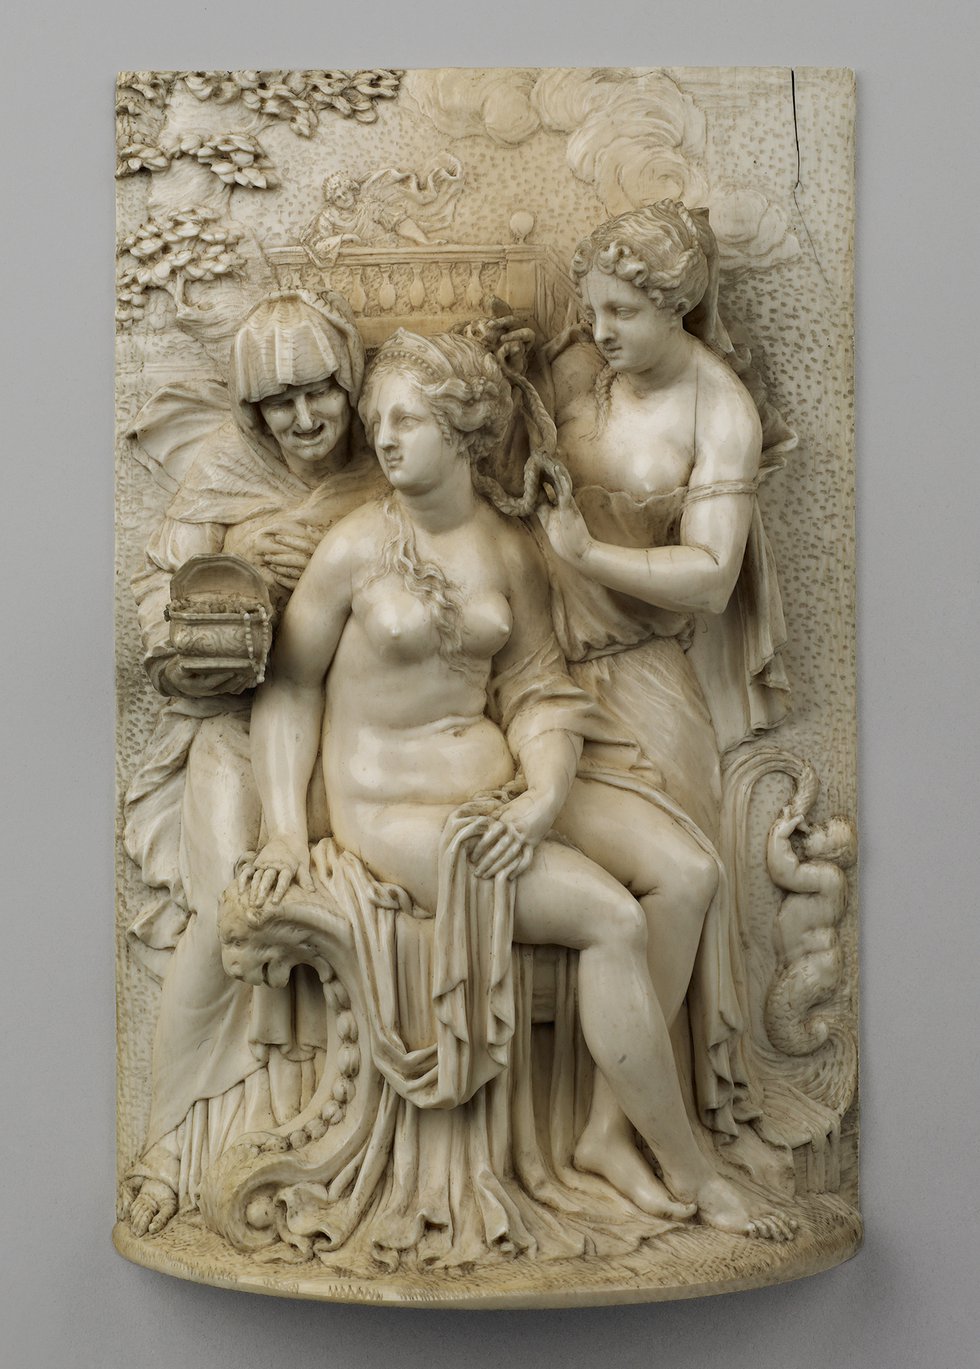 An image of a sculpture depicting the Toilet of Bathsheba